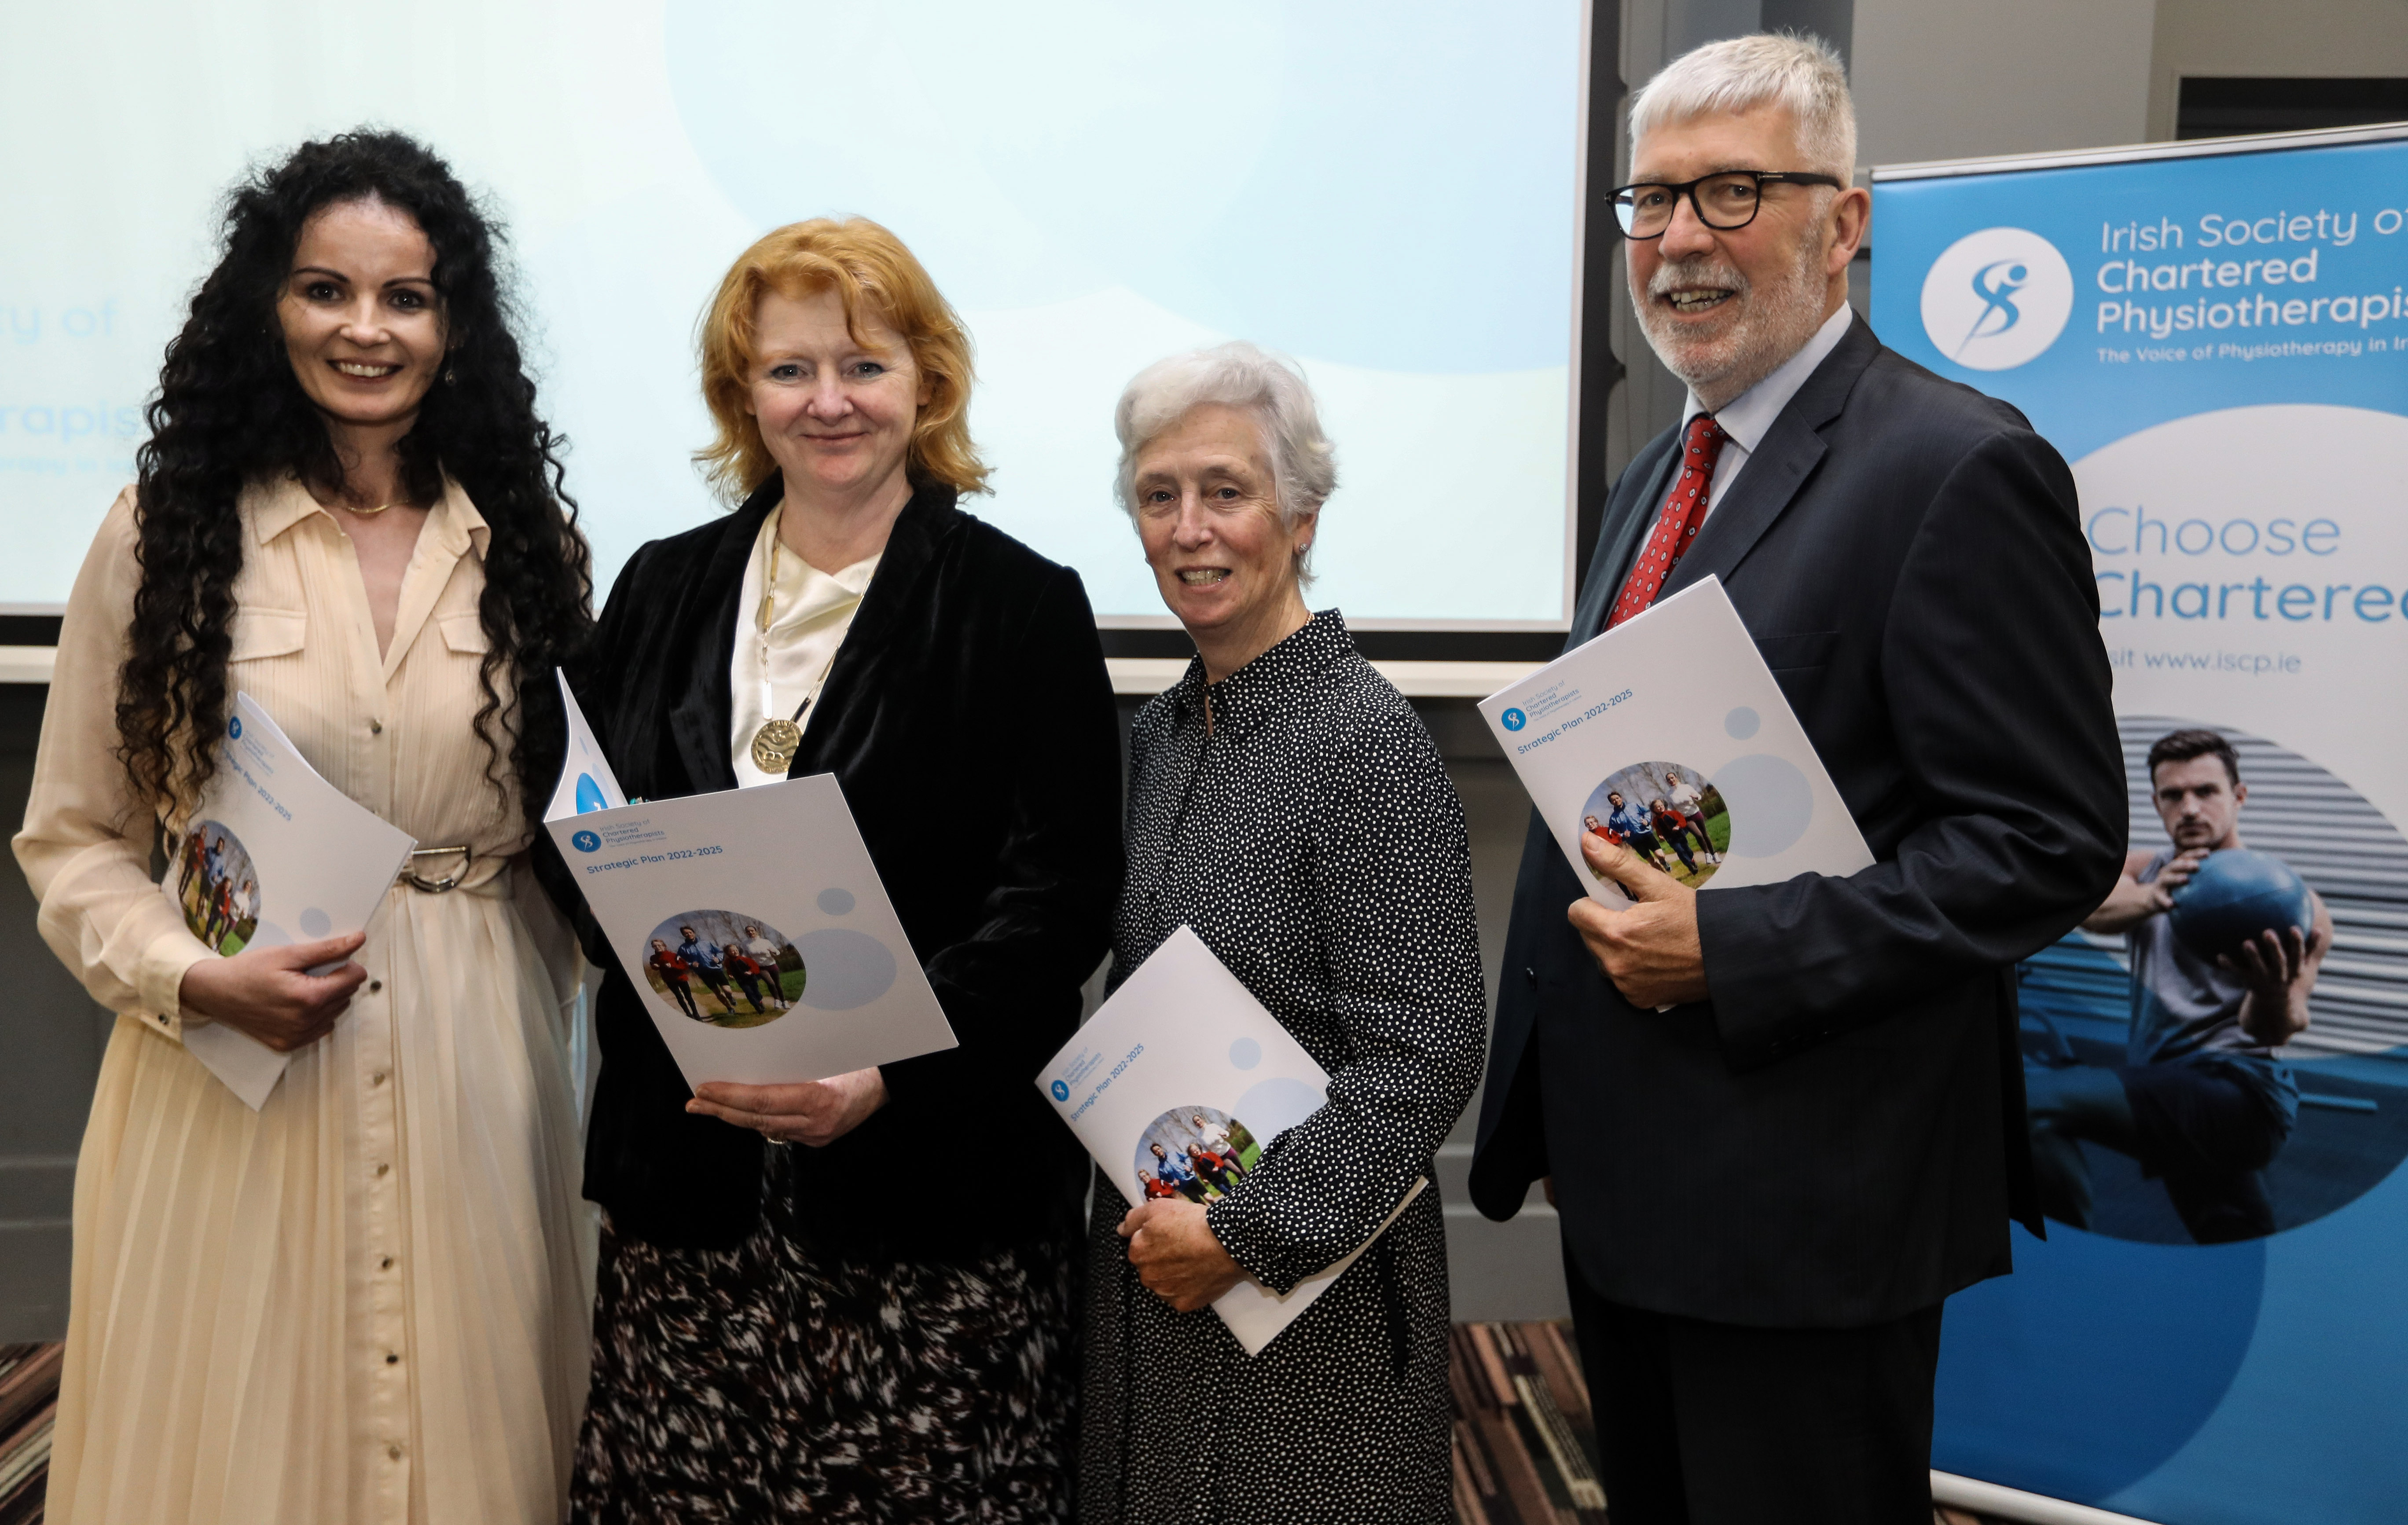 Launching the ISCP Strategic Plan 2022-2025  L-R are: Head of Professional Development Rachel Maguire, President  Gay Peart-Murphy, Professional Advisor Esther-Mary D’arcy and CEO Ruaidhri O’Connor